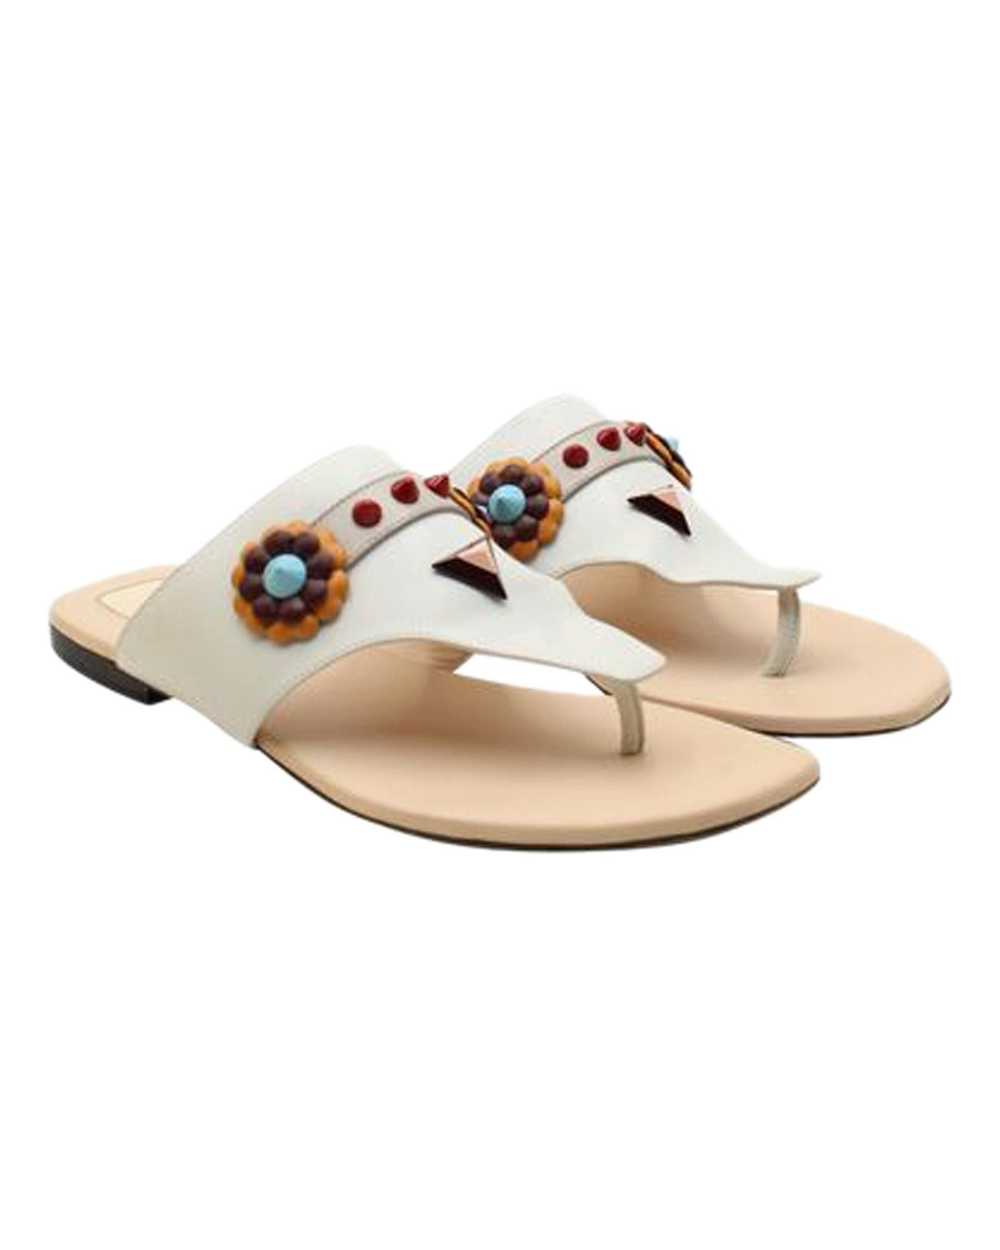 Fendi Leather Studded Thong Sandals from Italy - image 2